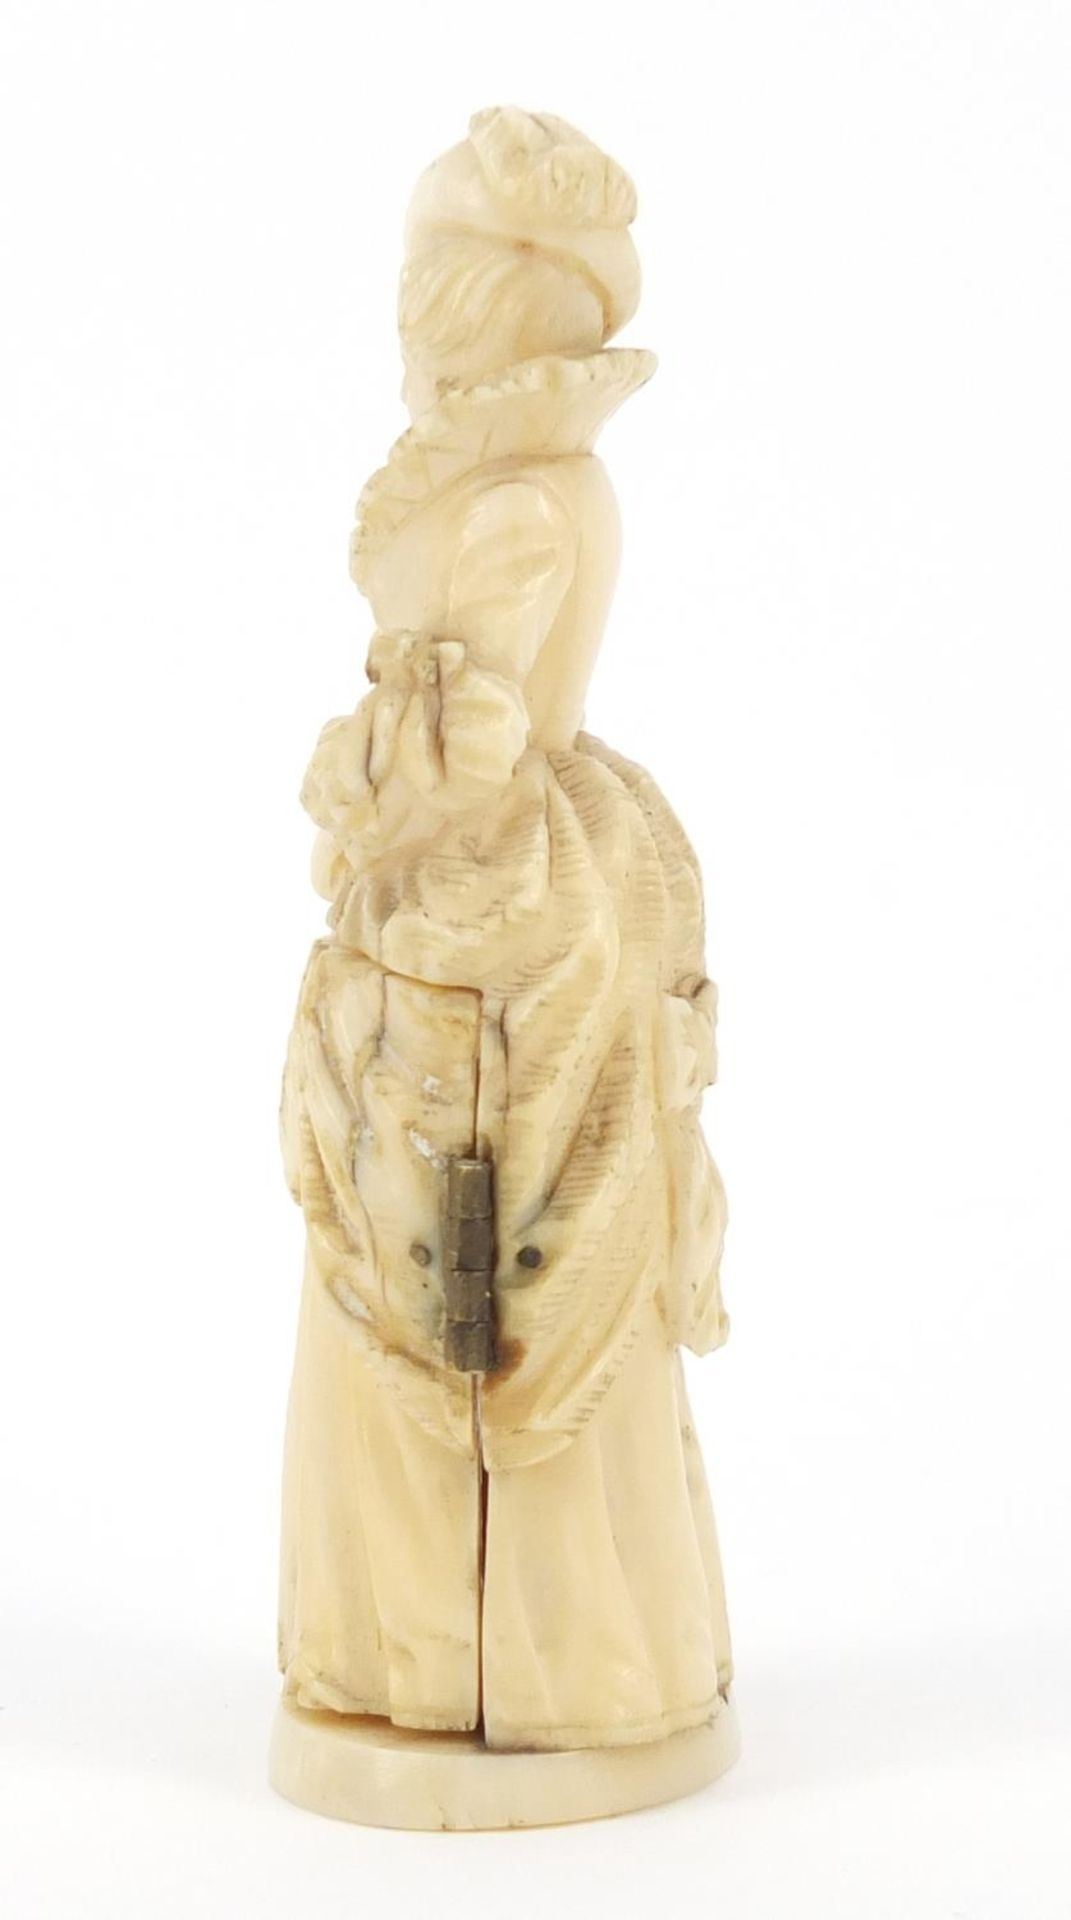 19th century French Dieppe carved ivory tryptych figure, 9cm high - Image 5 of 9